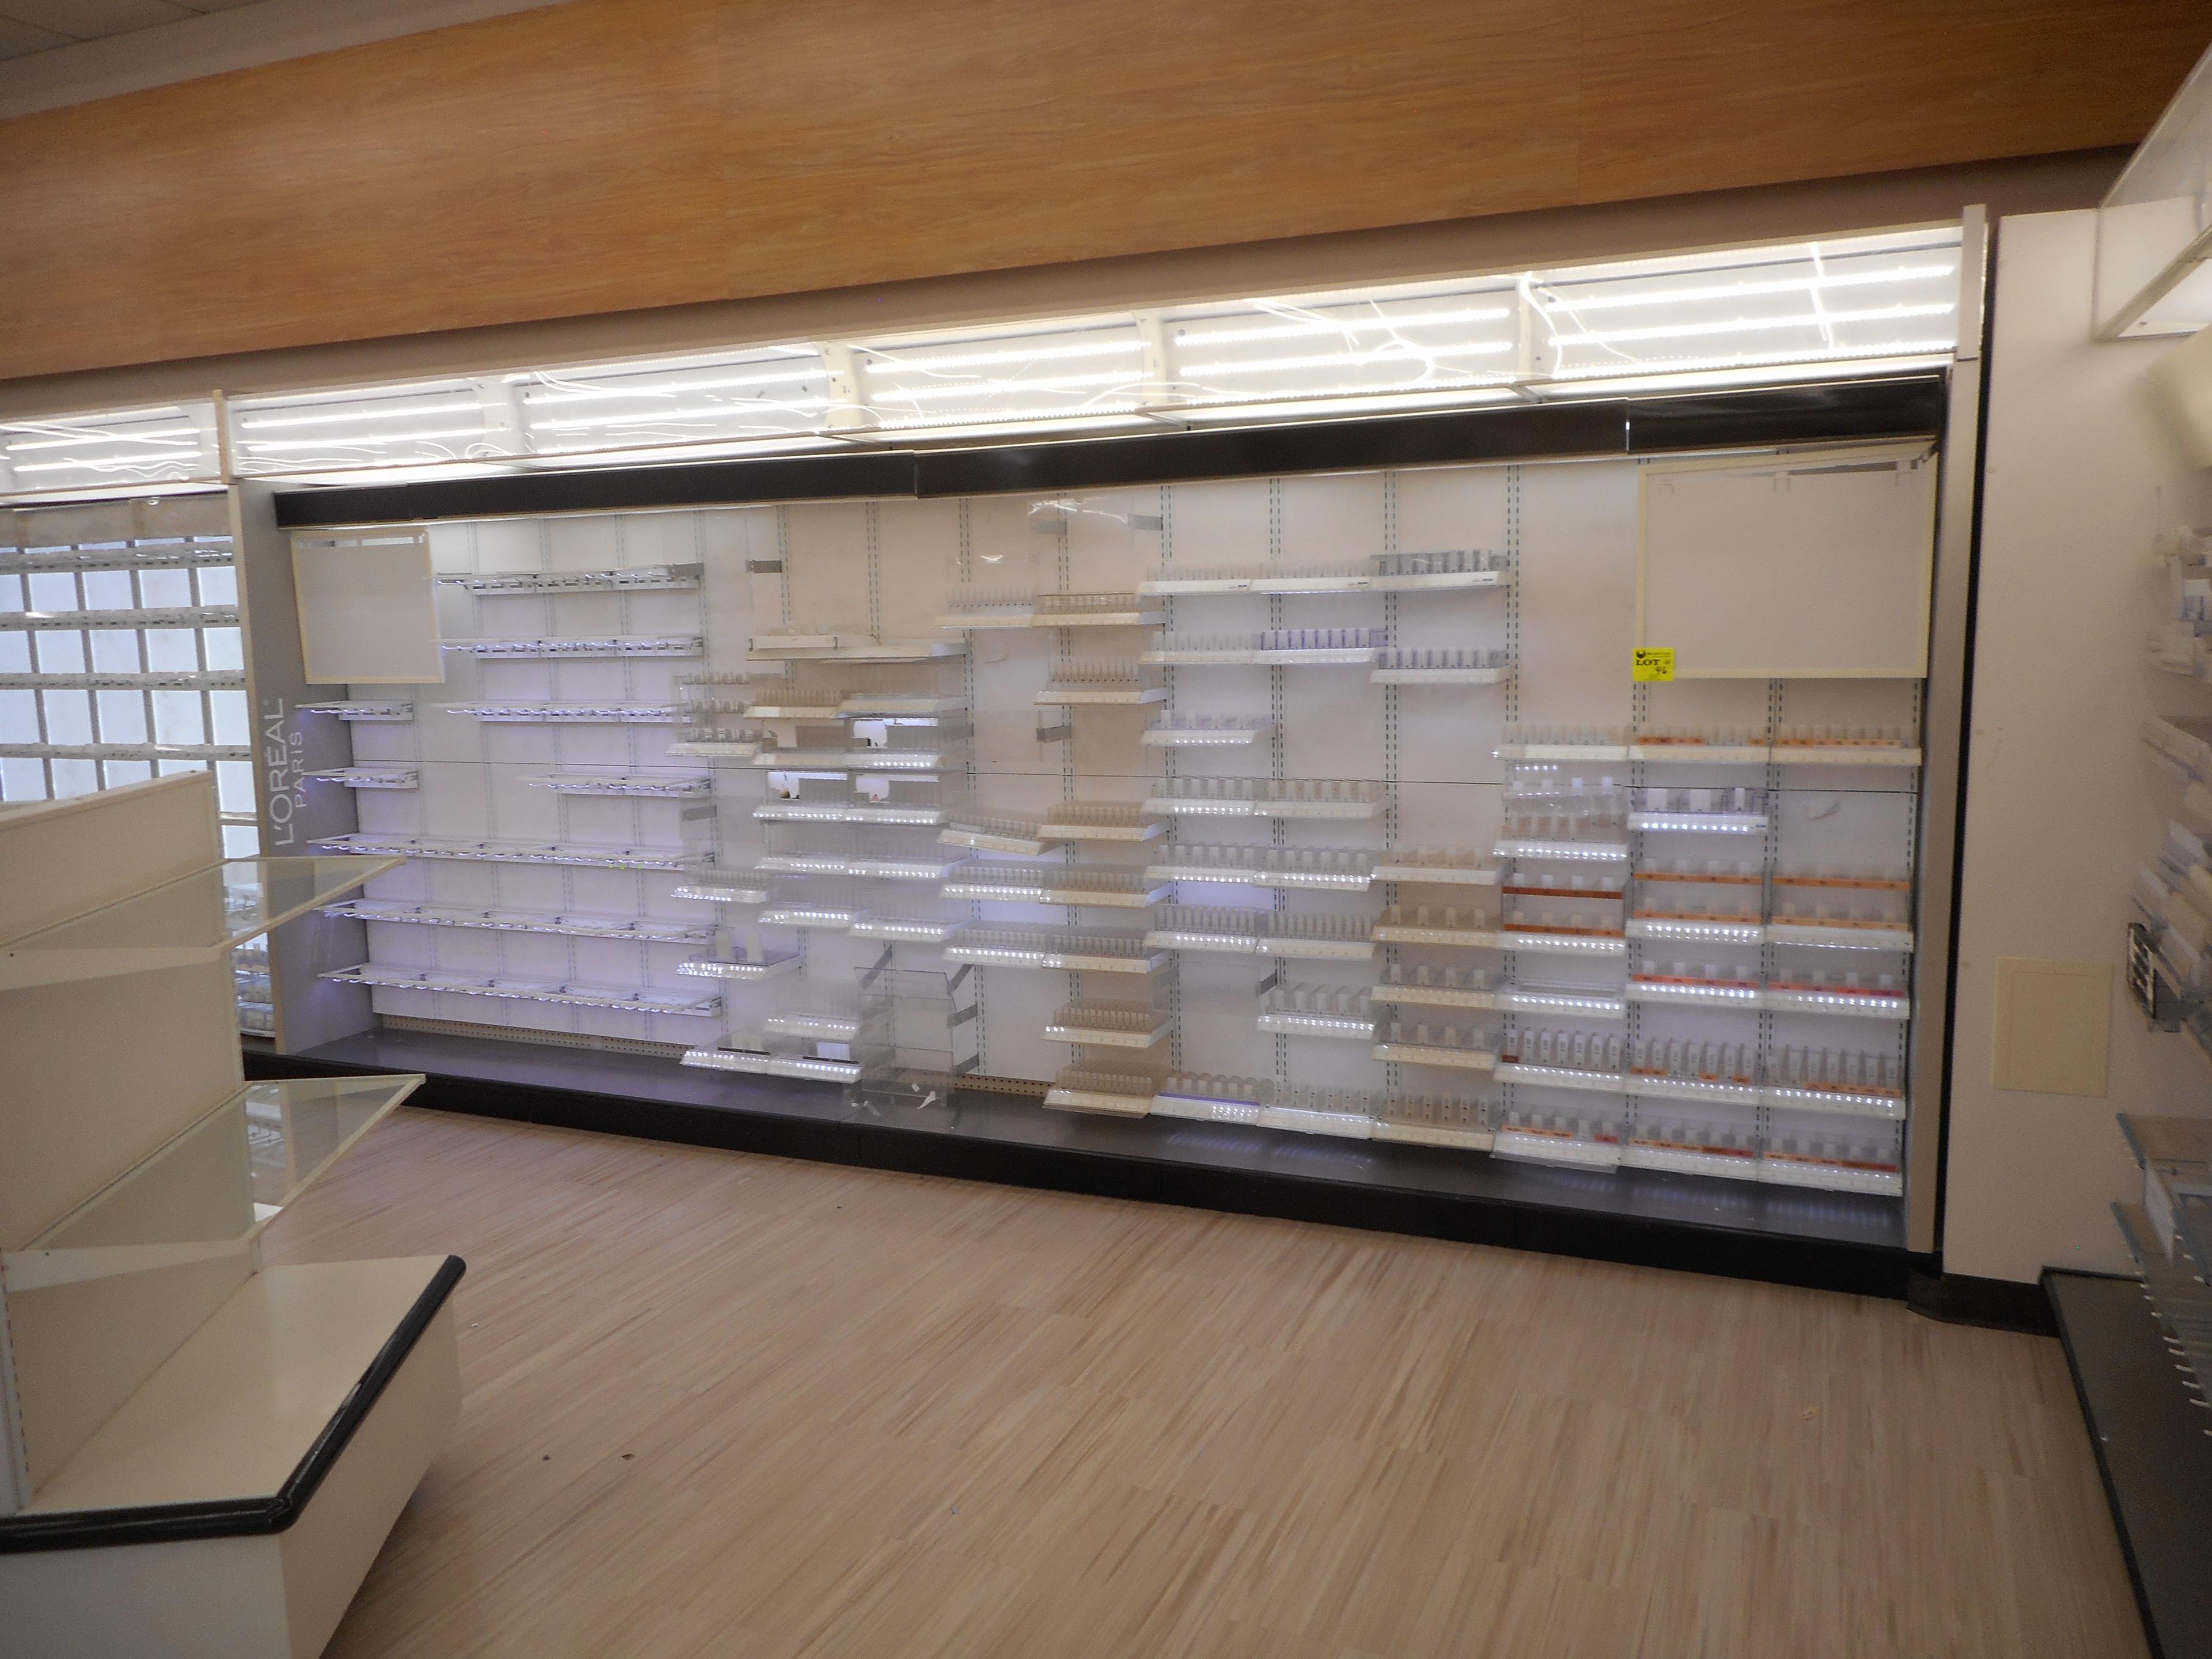 124 FT WHITE WALL SHELVING WITH COSMETICS DISPLAYS 84 INCHES TALL